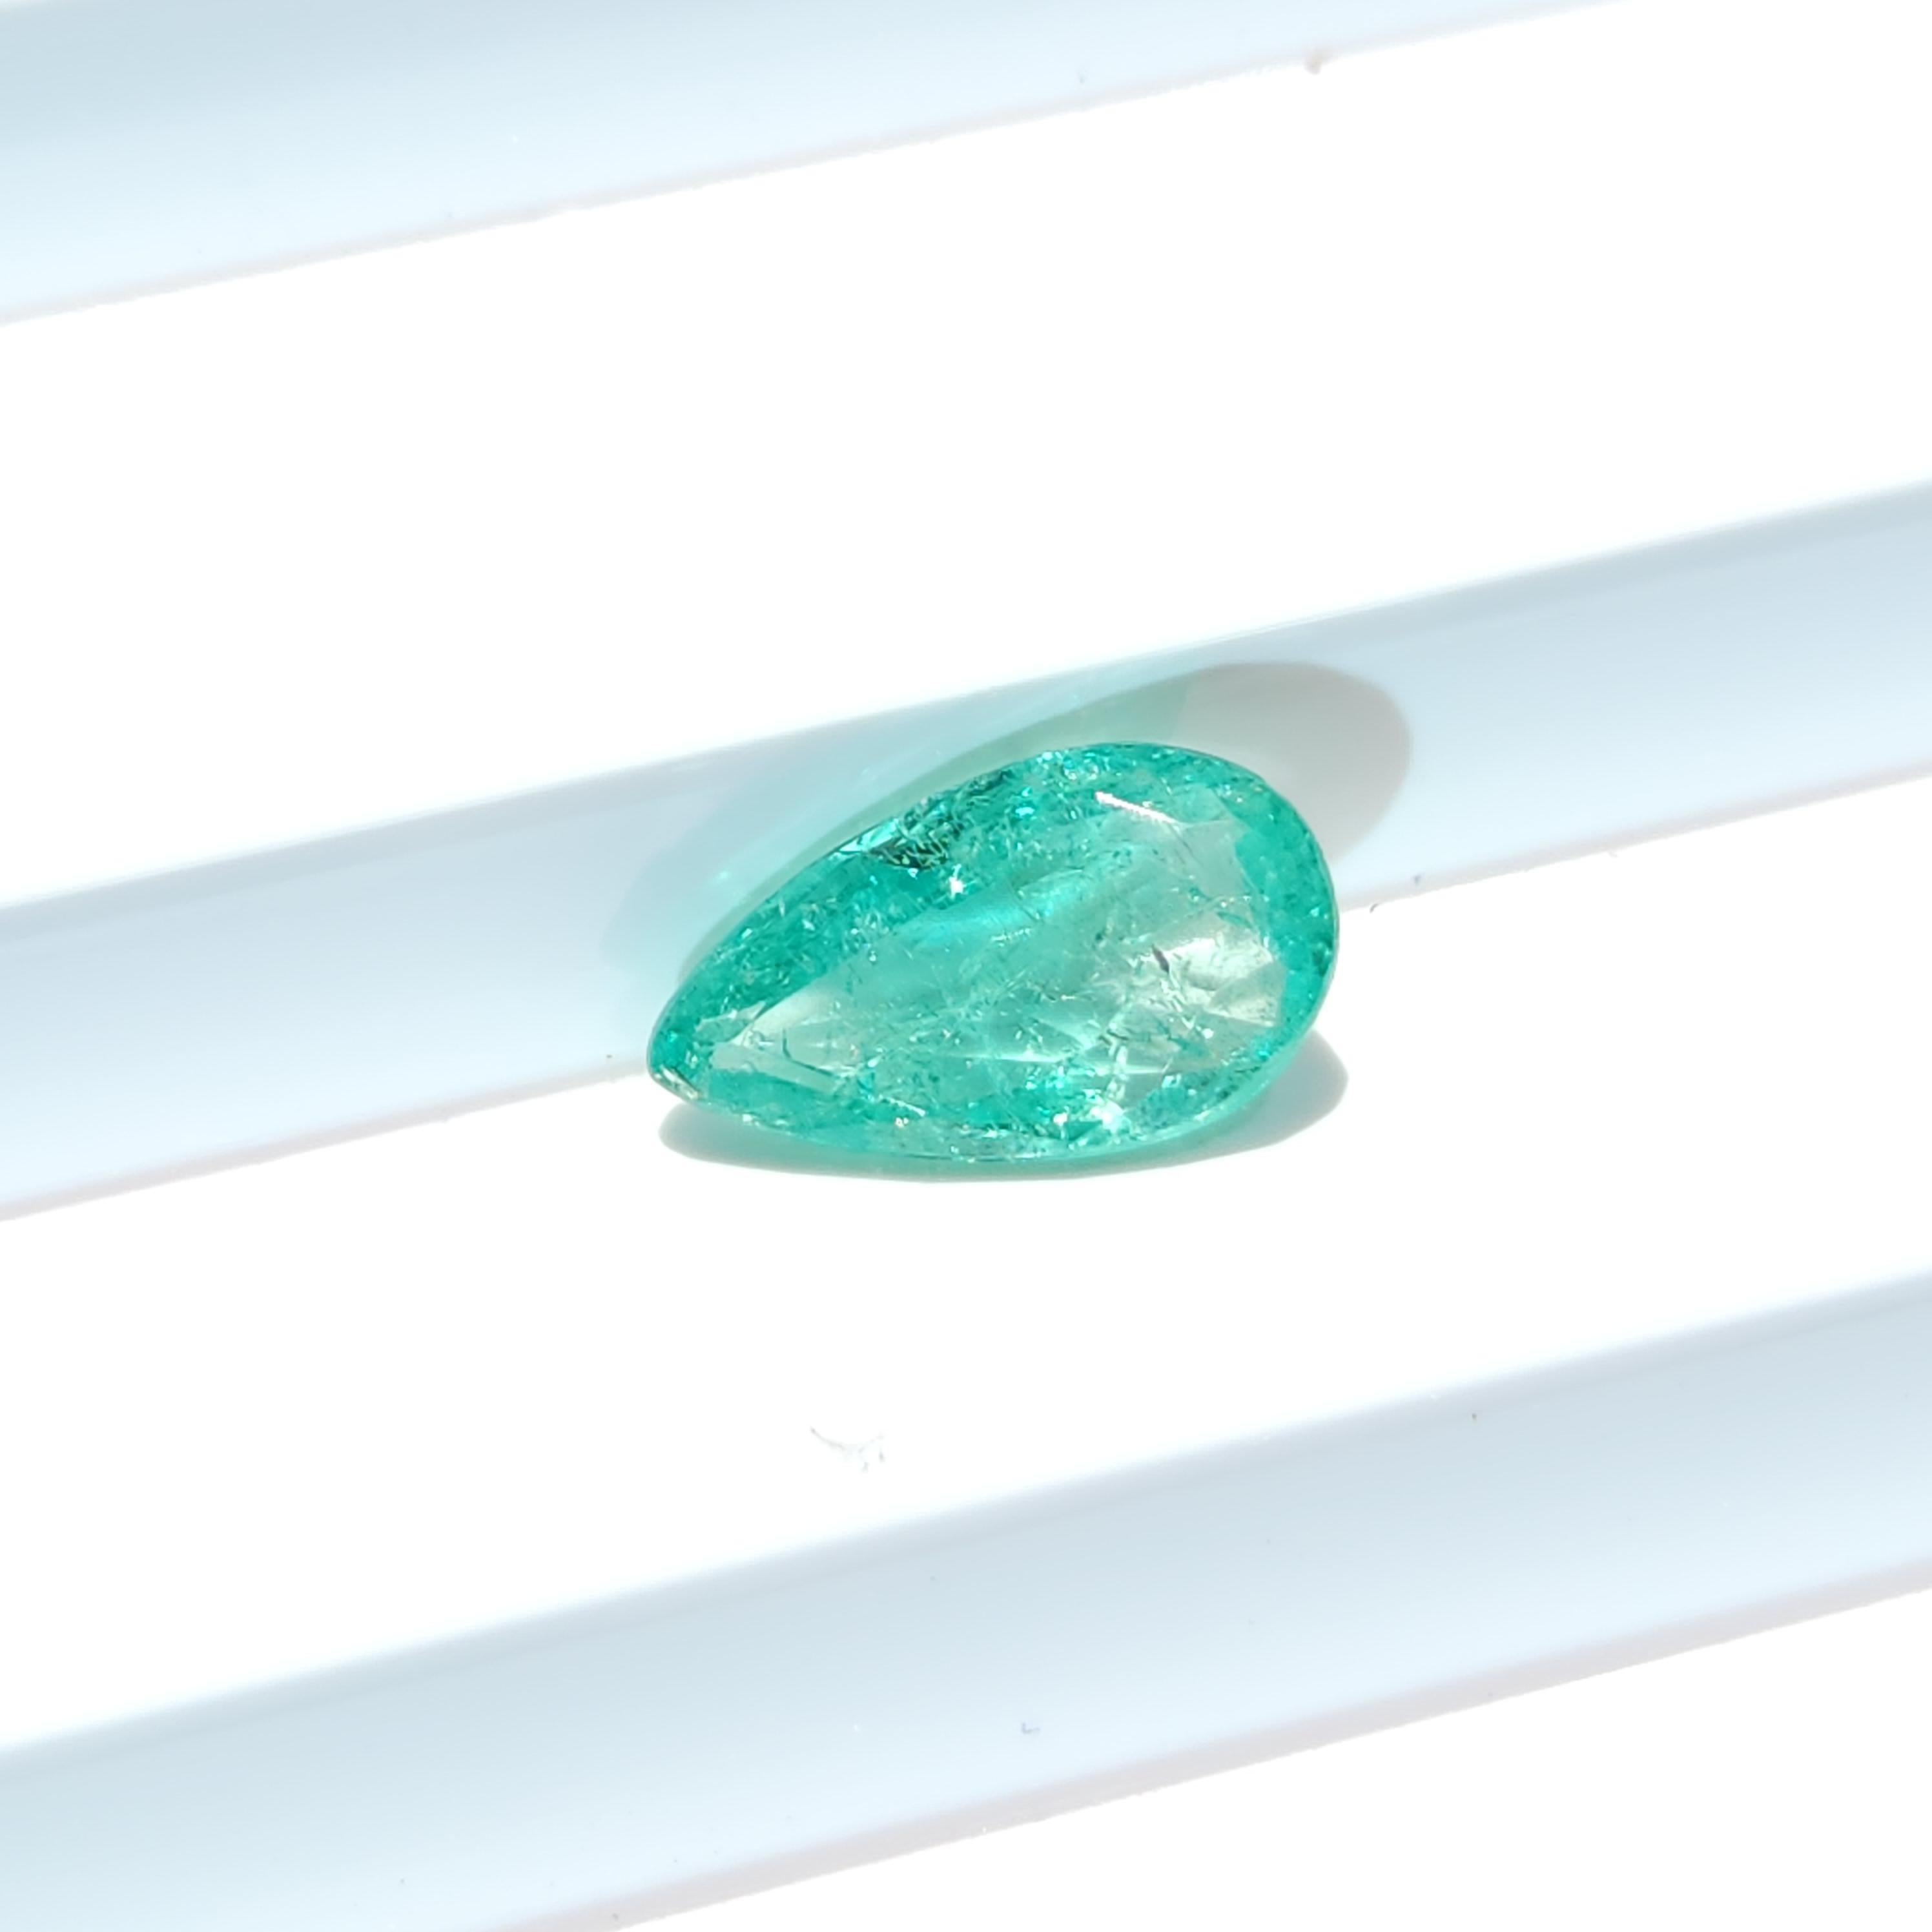 Elegant 1.26ct Loose Pear Shape Colombian Emerald Gemstone

Product Description:

Unveiling our captivating 1.26ct loose Pear Shape Colombian Emerald gemstone, a genuine reflection of Colombia's verdant heart and nature's impeccable craftsmanship.